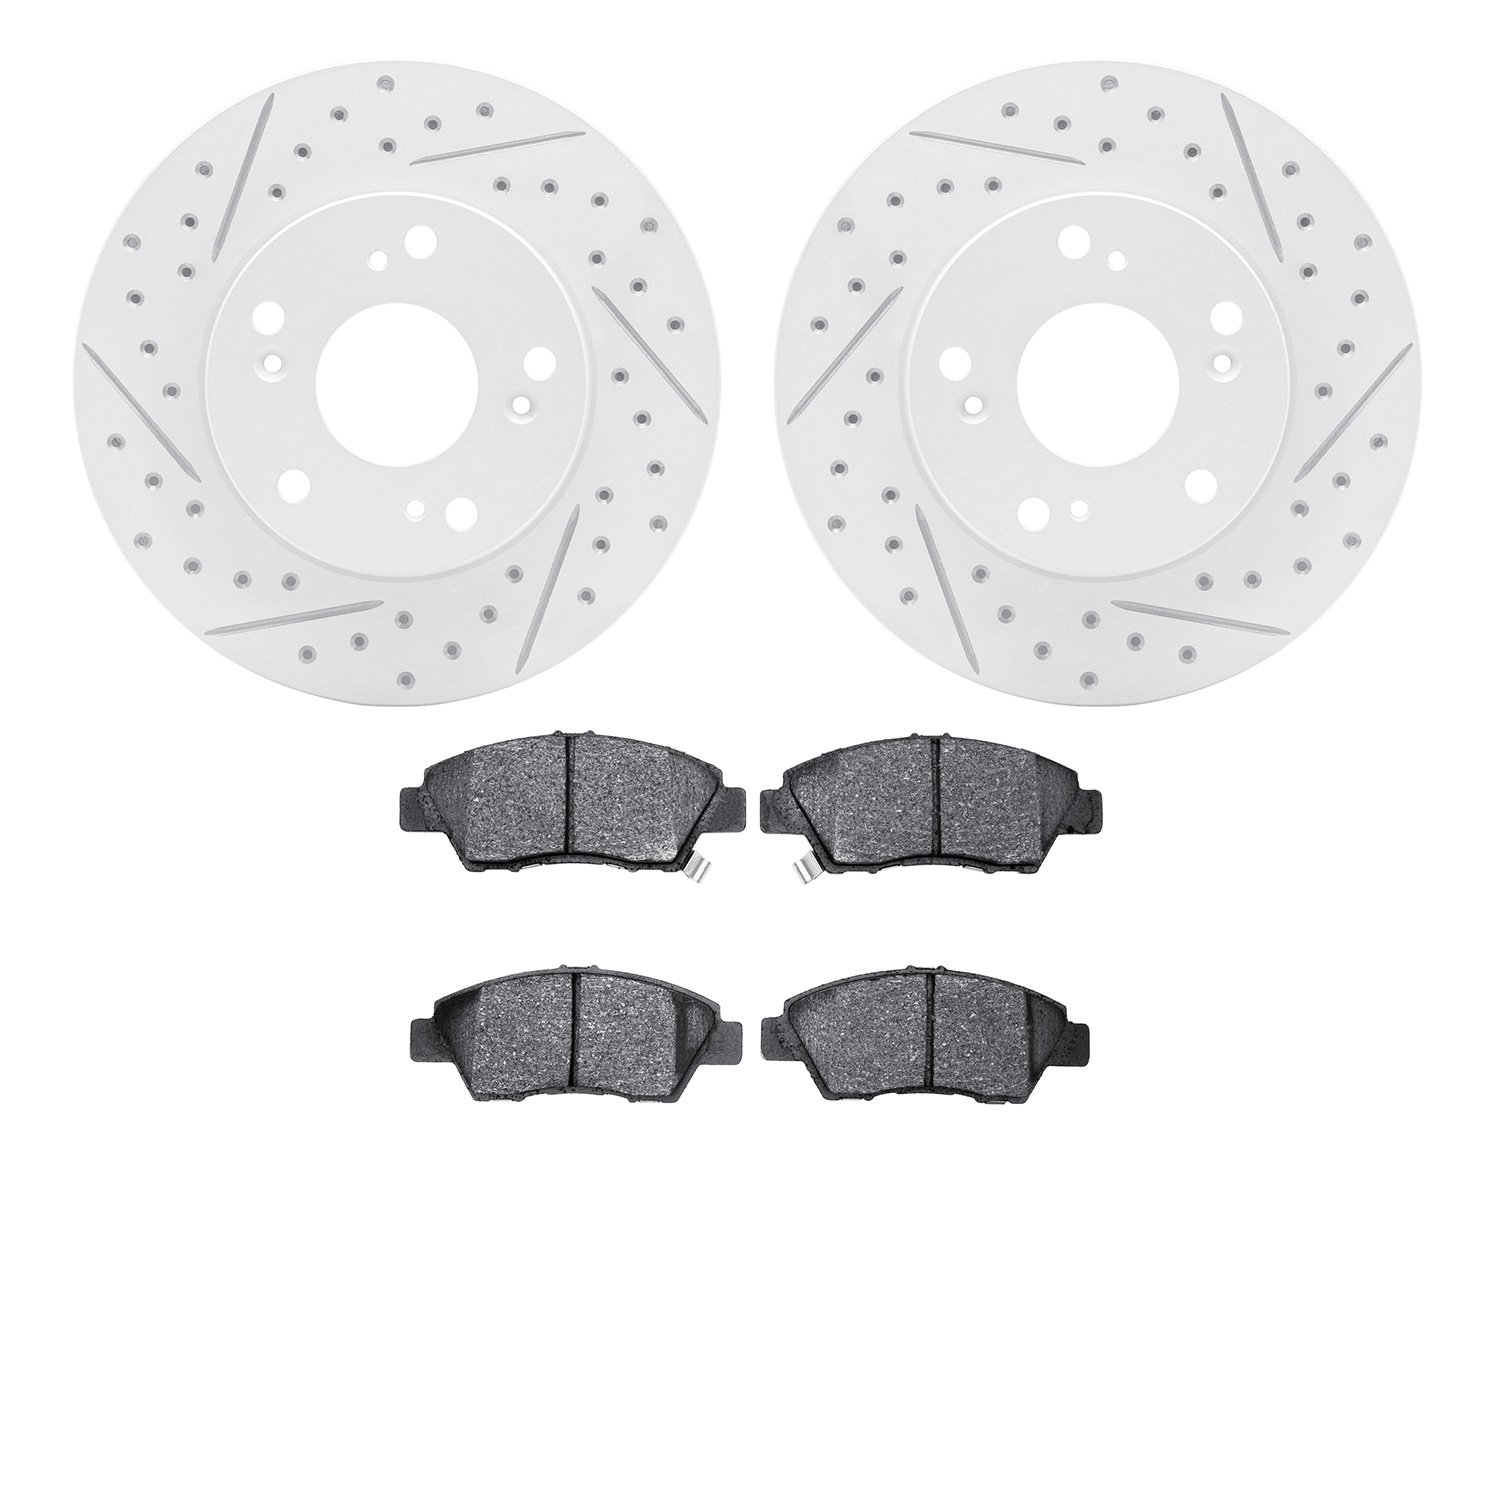 2502-59028 Geoperformance Drilled/Slotted Rotors w/5000 Advanced Brake Pads Kit, 2011-2015 Acura/Honda, Position: Front